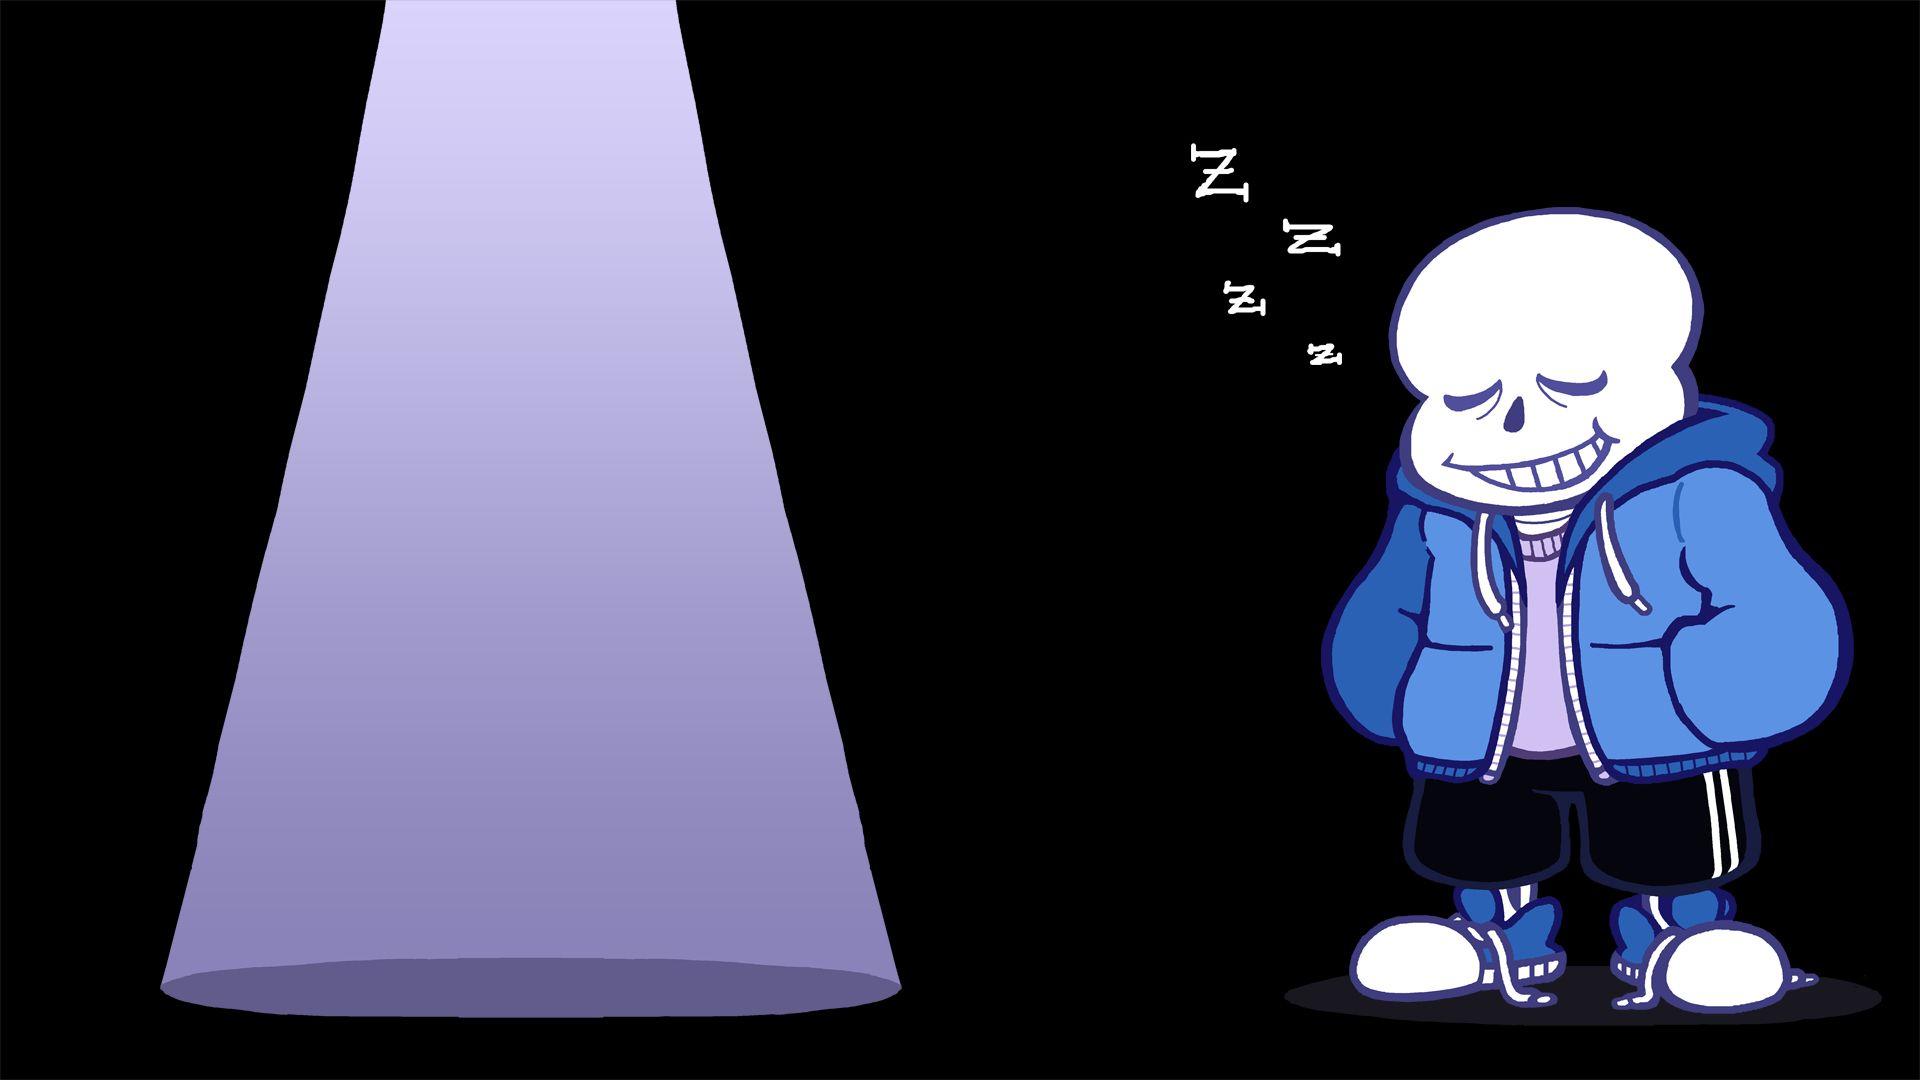 Wallpaper - Undertale General Discussions